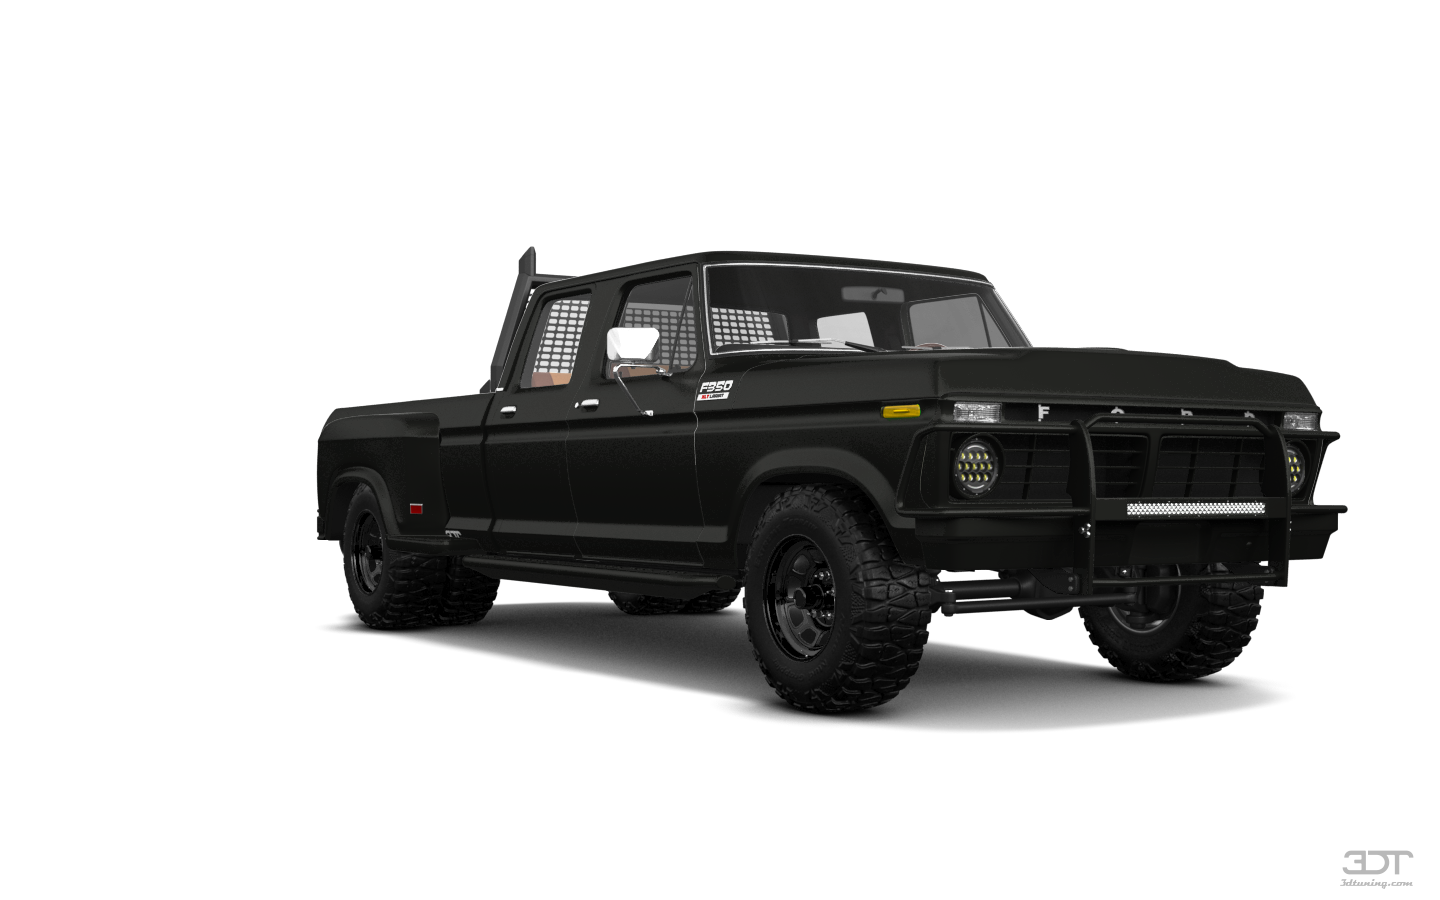 Ford F-350 Dually 4 Door pickup truck 1973